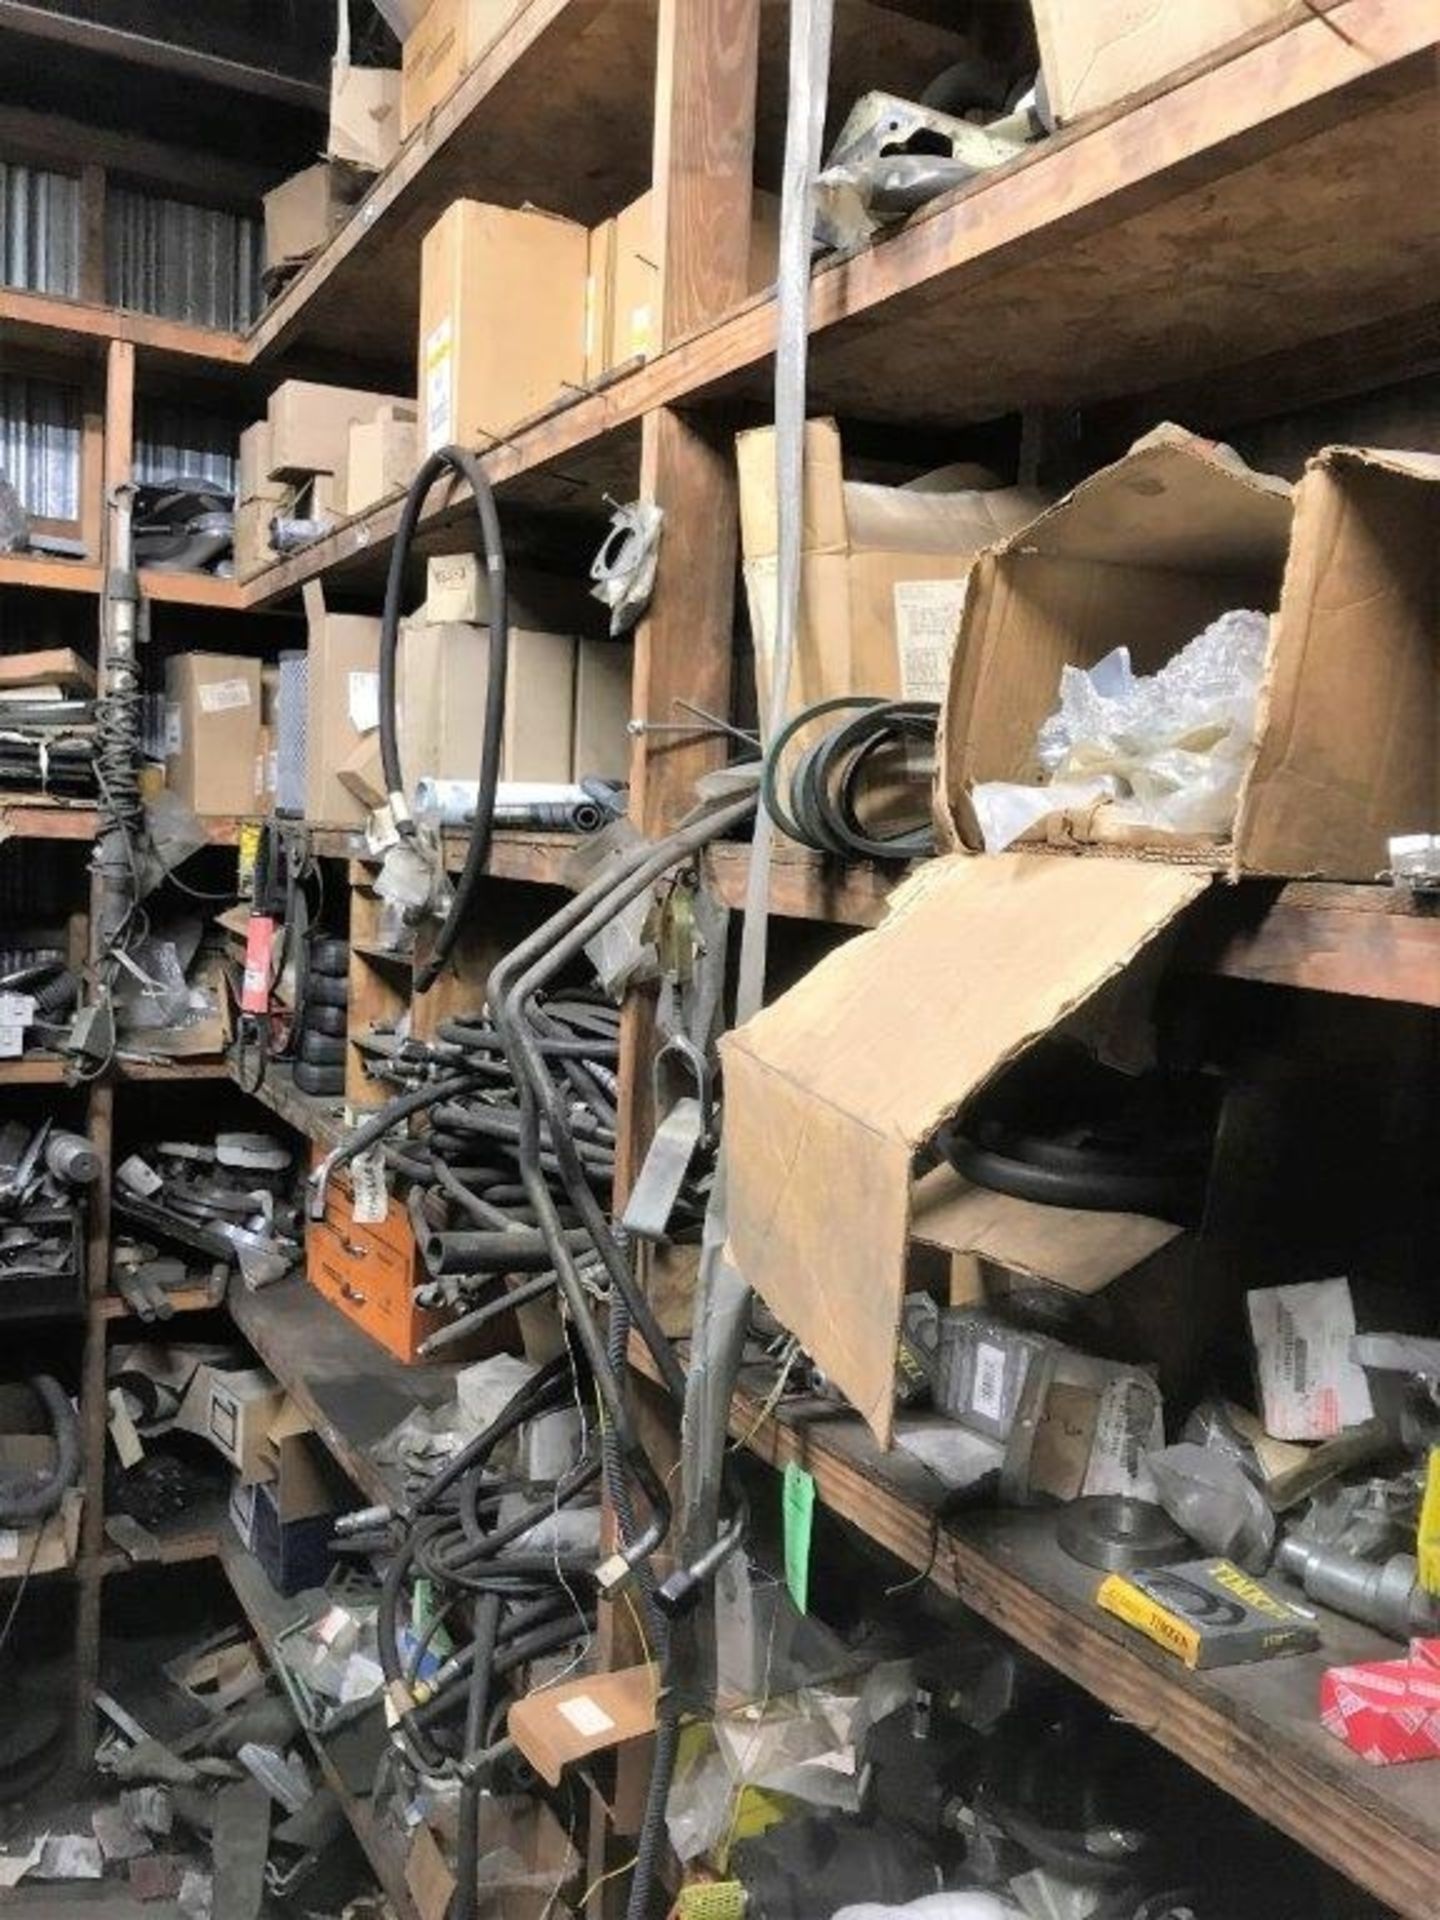 CONTENTS OF MACHINE SHOP PARTS ROOM WITH FACILITY MAINTENANCE AND SPARE MACHINE PARTS. - Image 6 of 6